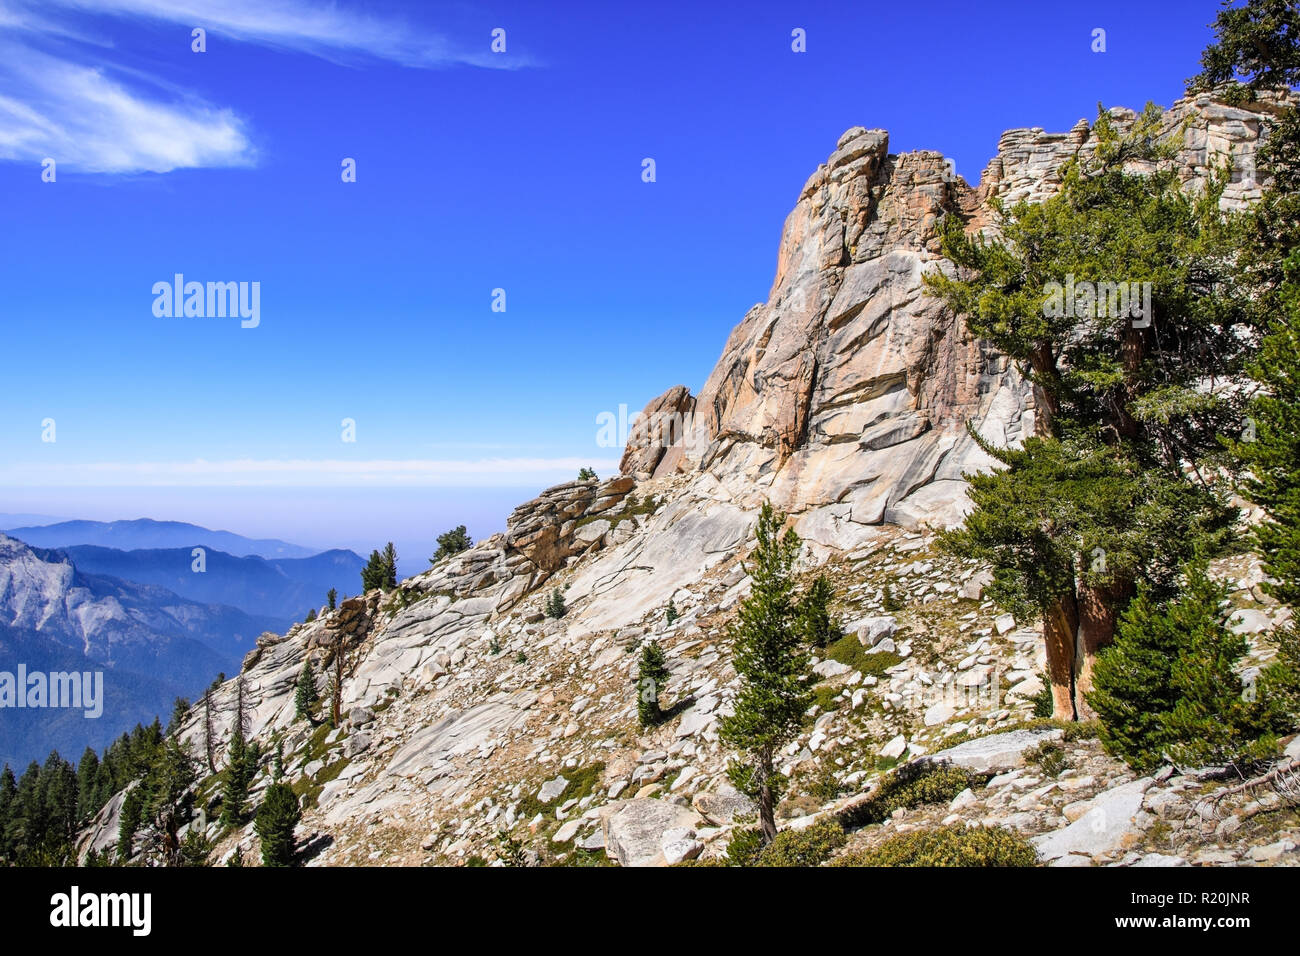 High altitude landscape in Sequoia National Park, Sierra Nevada mountains; blue sky and smoke from wildfires covering the valley visible in the backgr Stock Photo